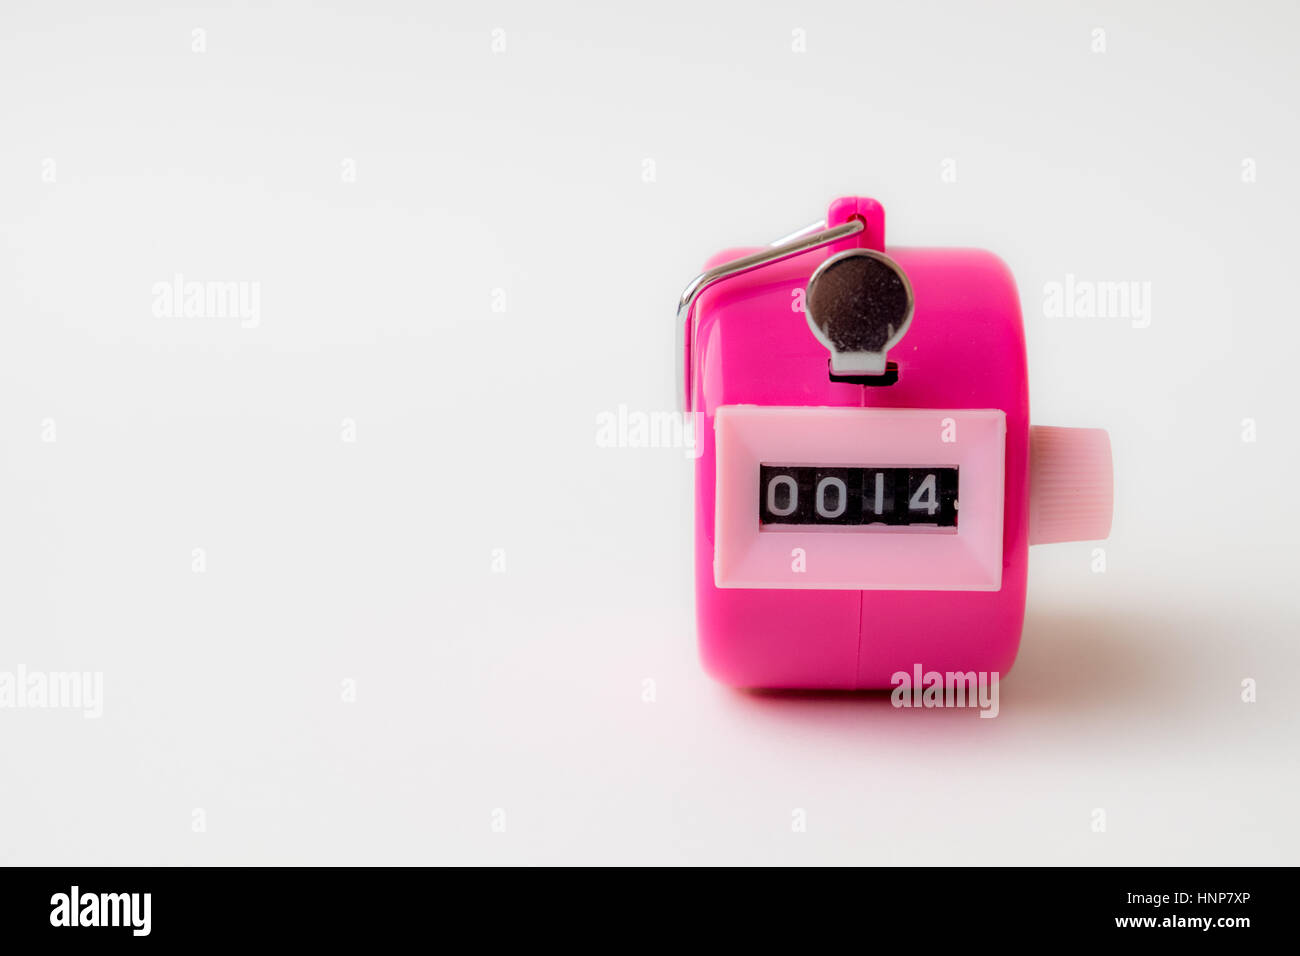 4 digi hand held tally  counter in pink color show number 14 with white background, valentine concept. Stock Photo